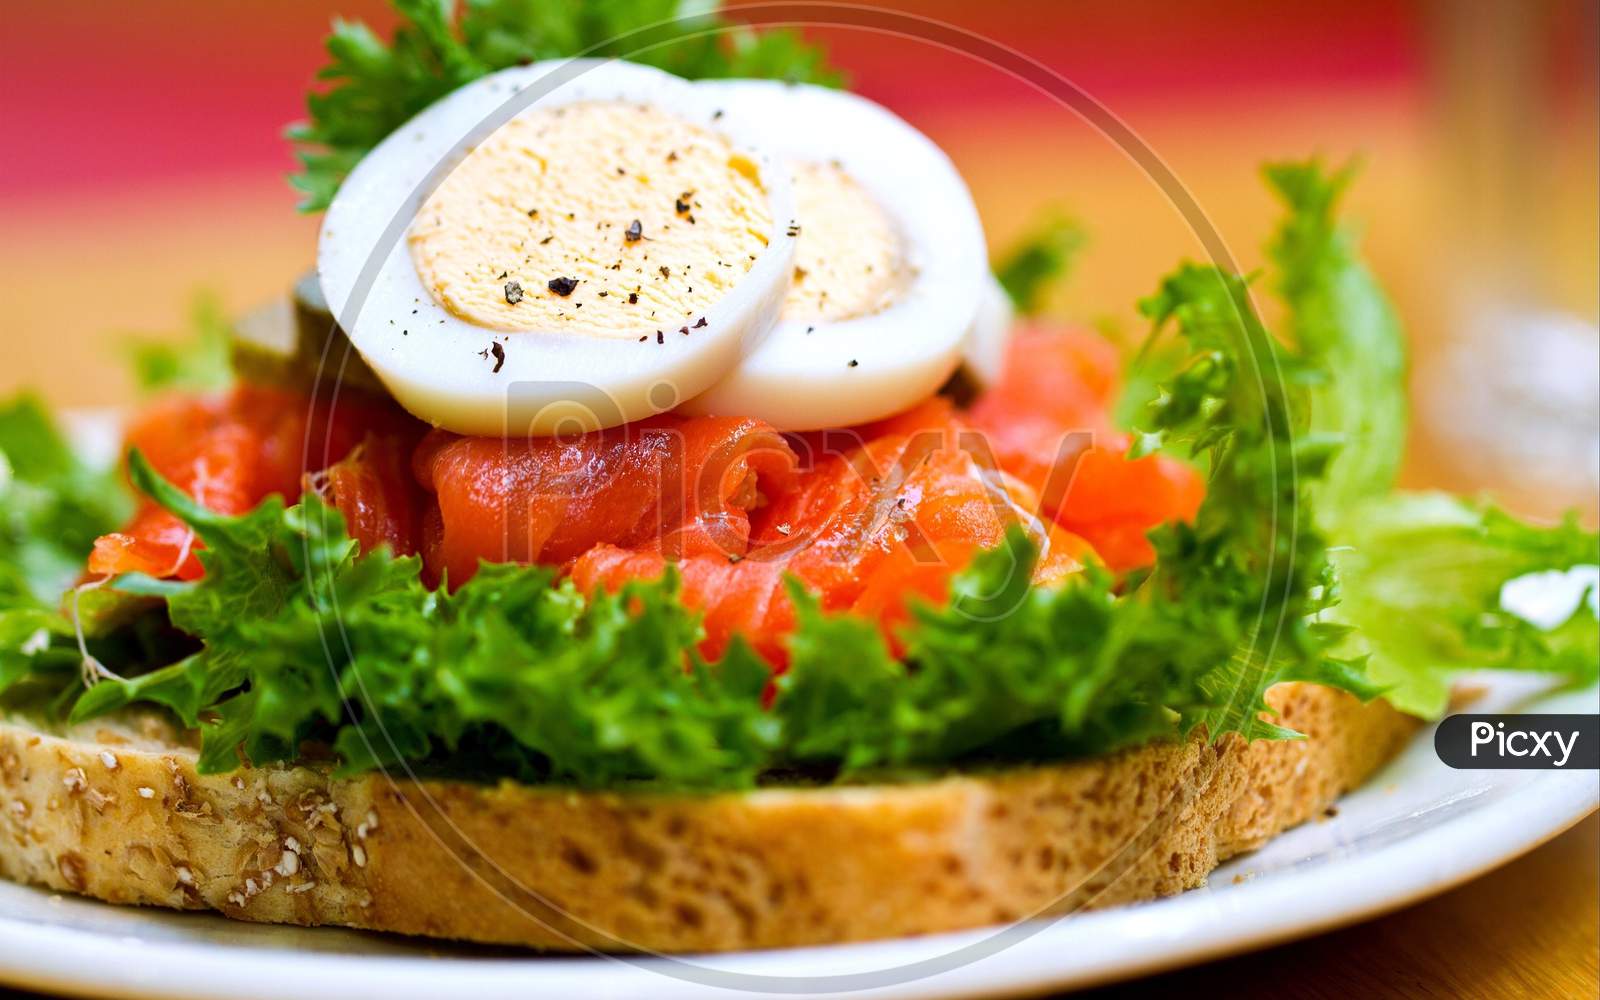 Boiled Egg with brown bread and vegetables